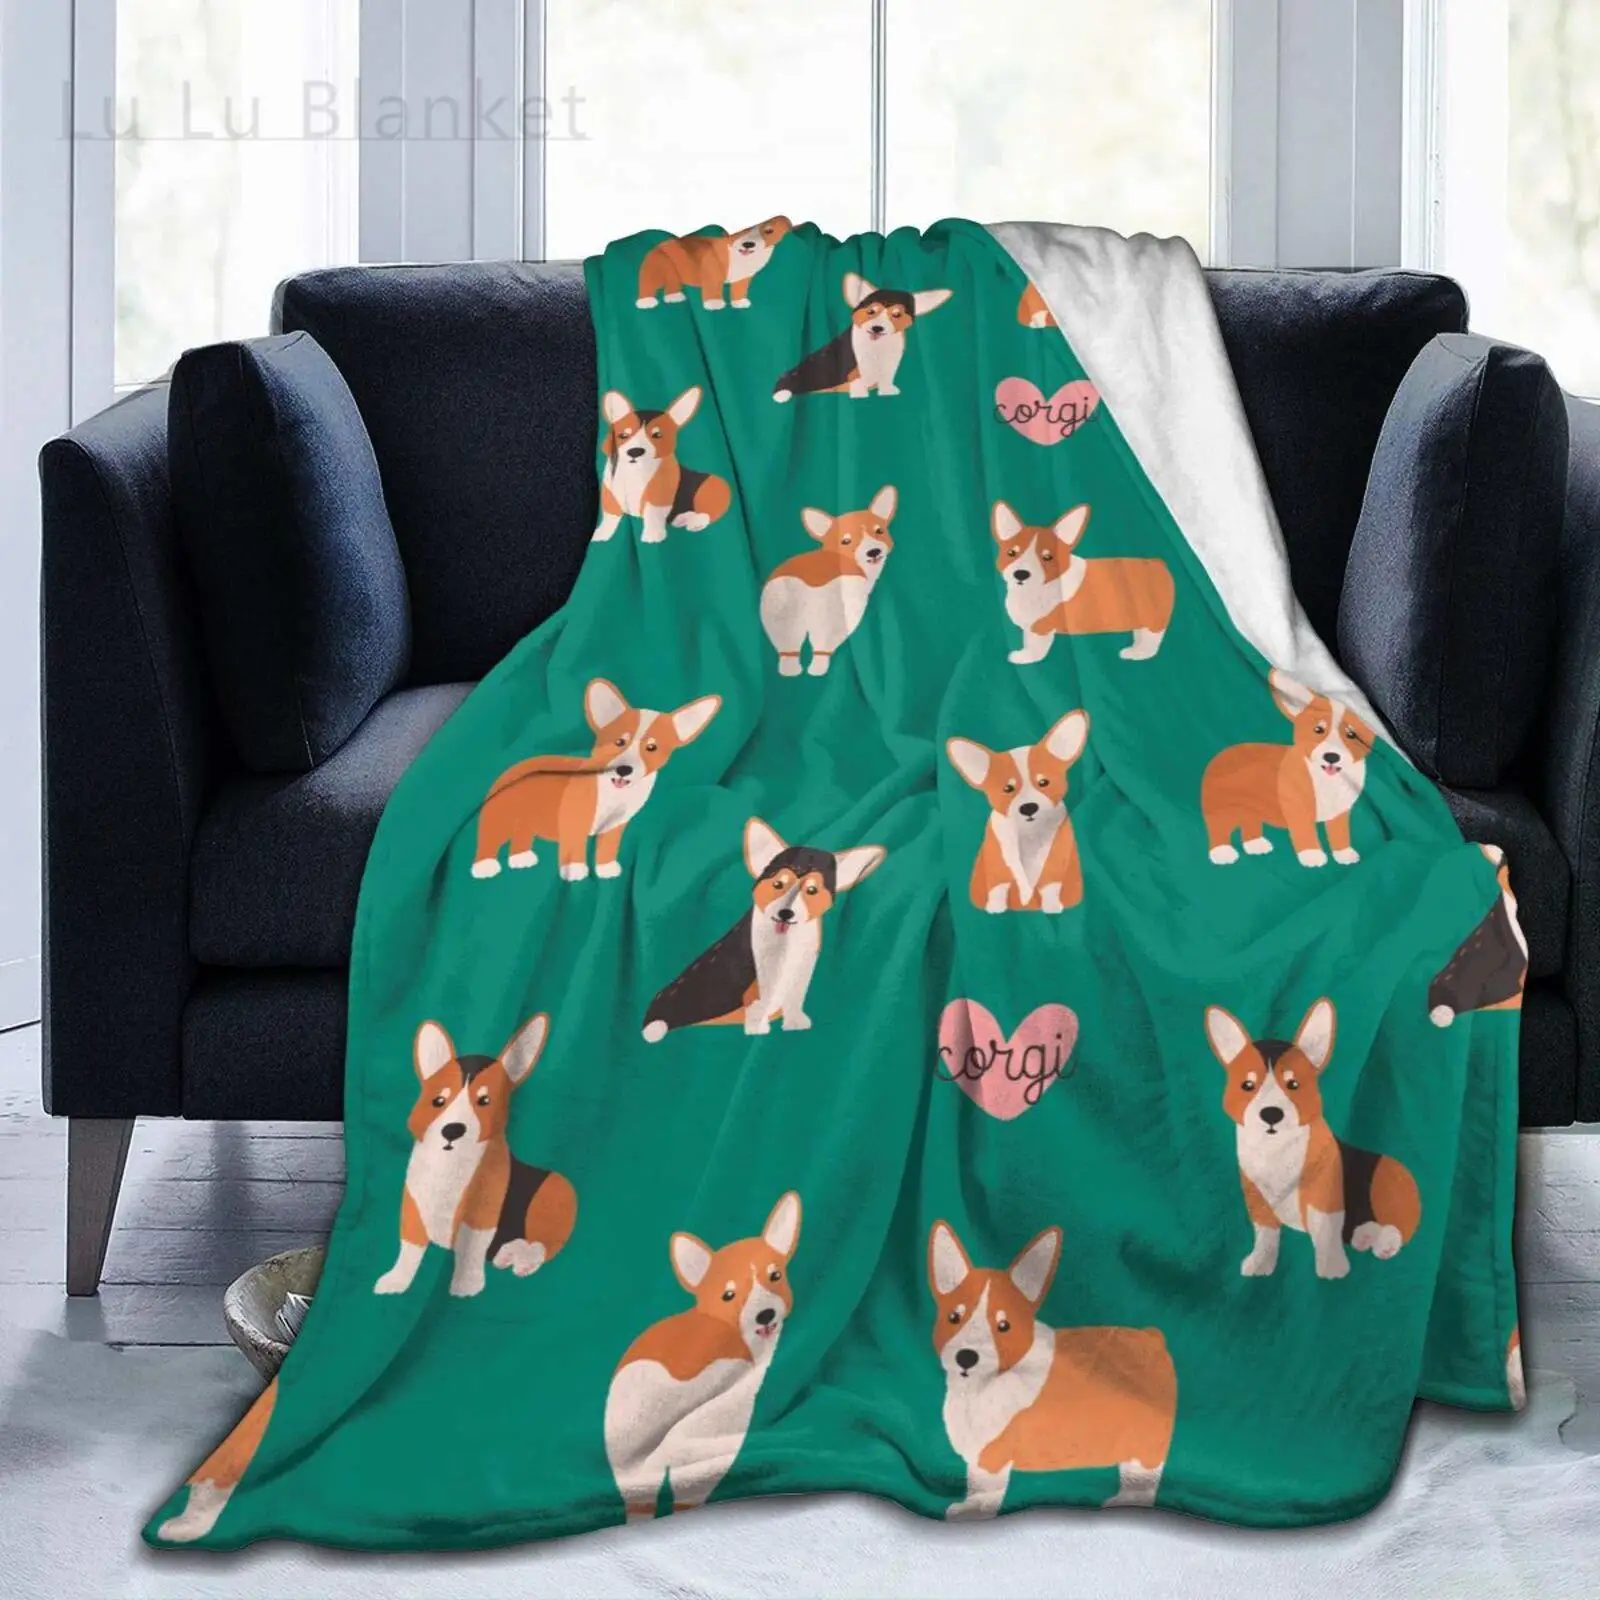 

Corgi Dog More Love Blanket Flannel Throw Blanket Ultra Soft Micro Fleece Blanket Bed Couch Living Room 150x220cm for Adults